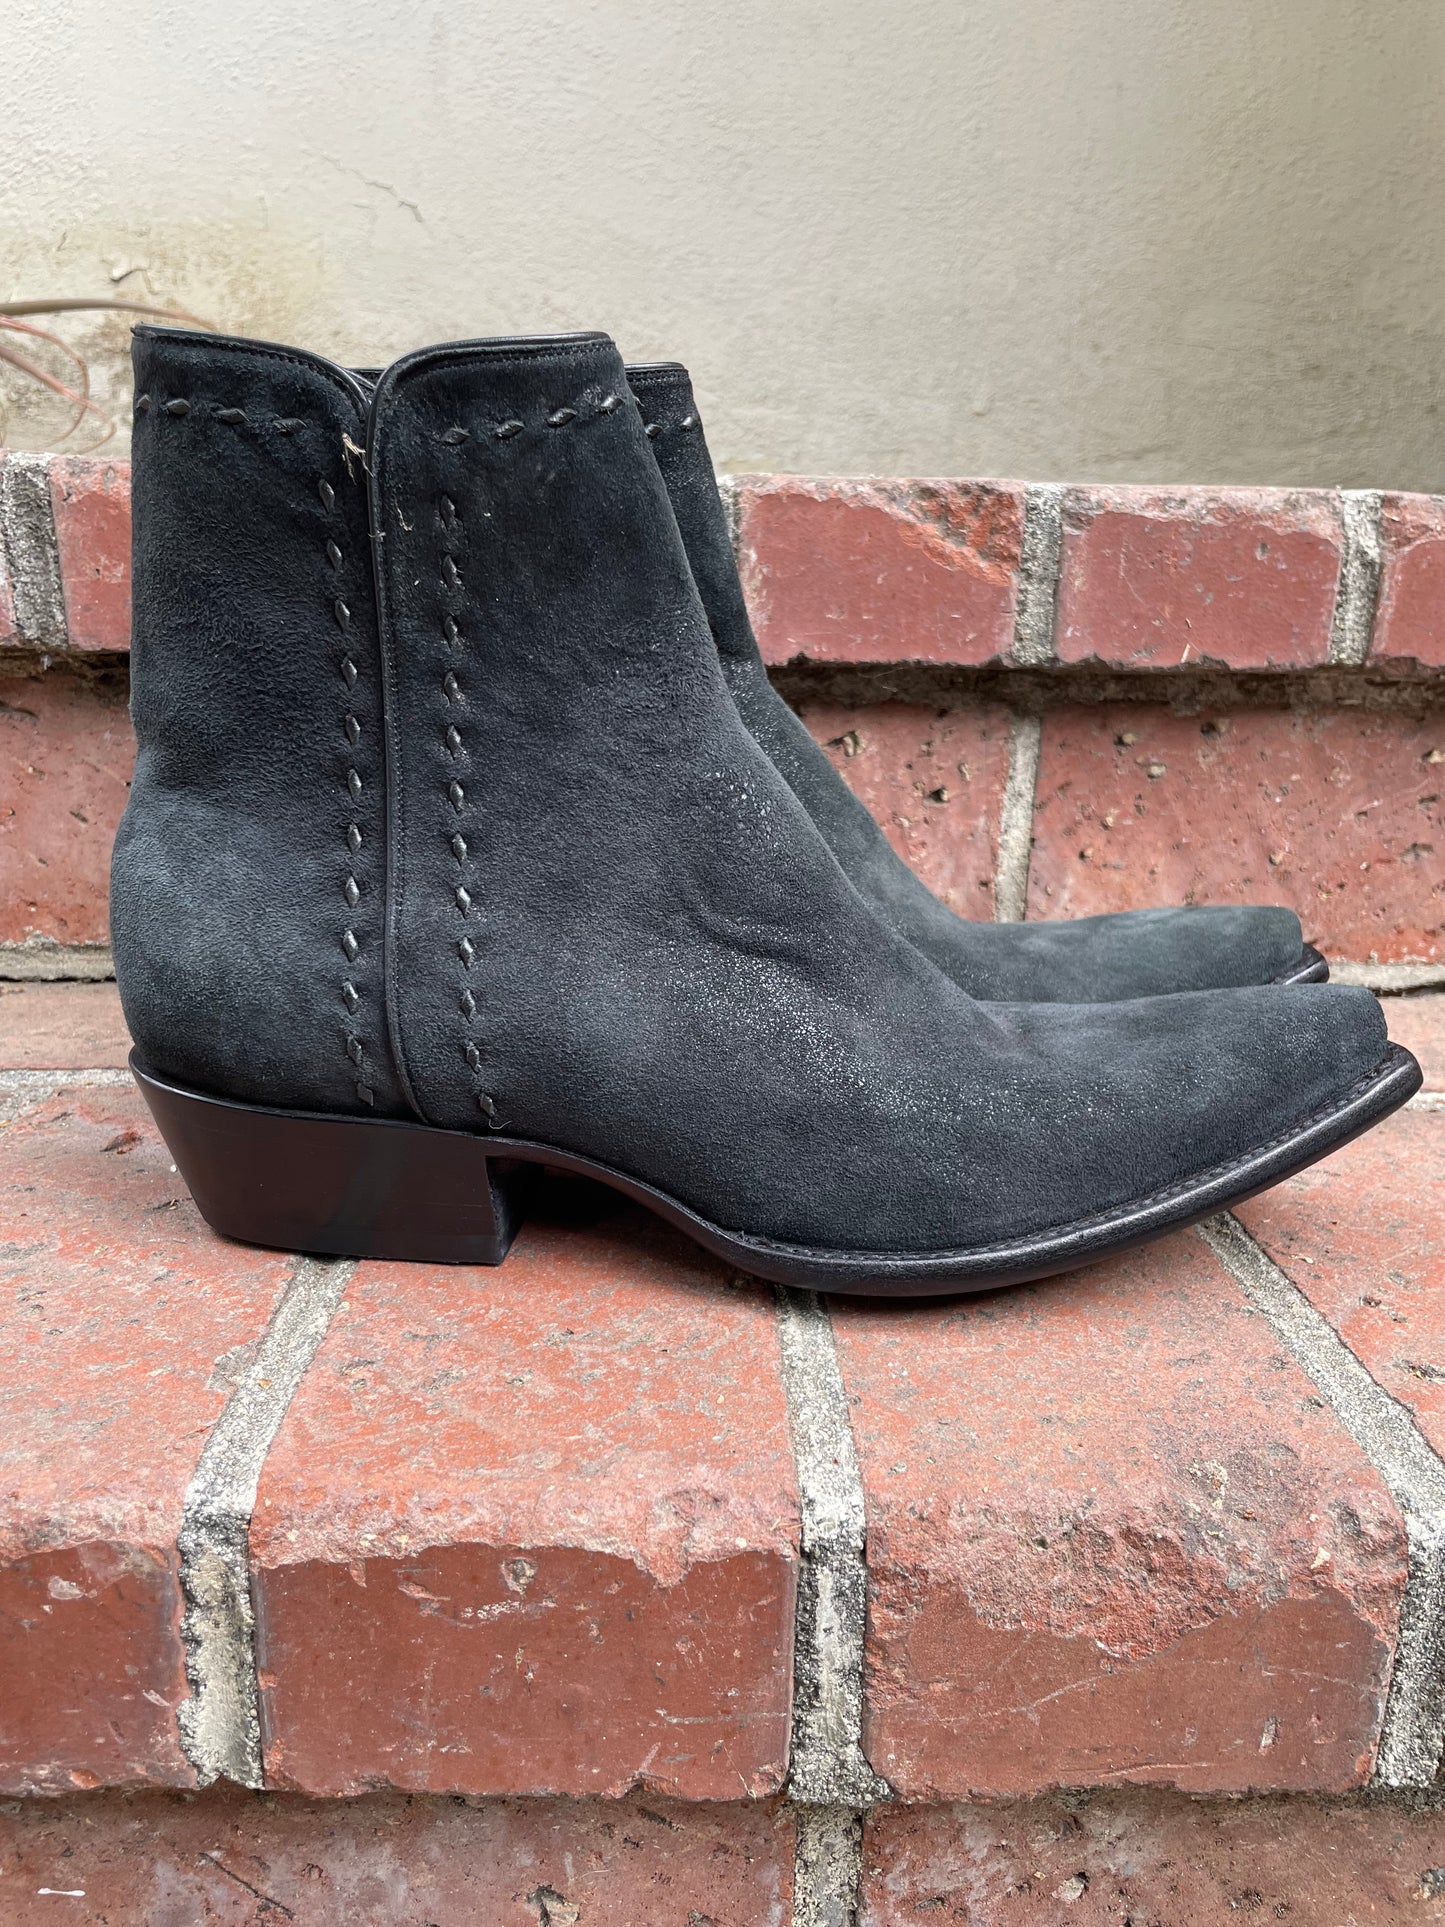 Aged Noir Lambsuede With Buckstitching